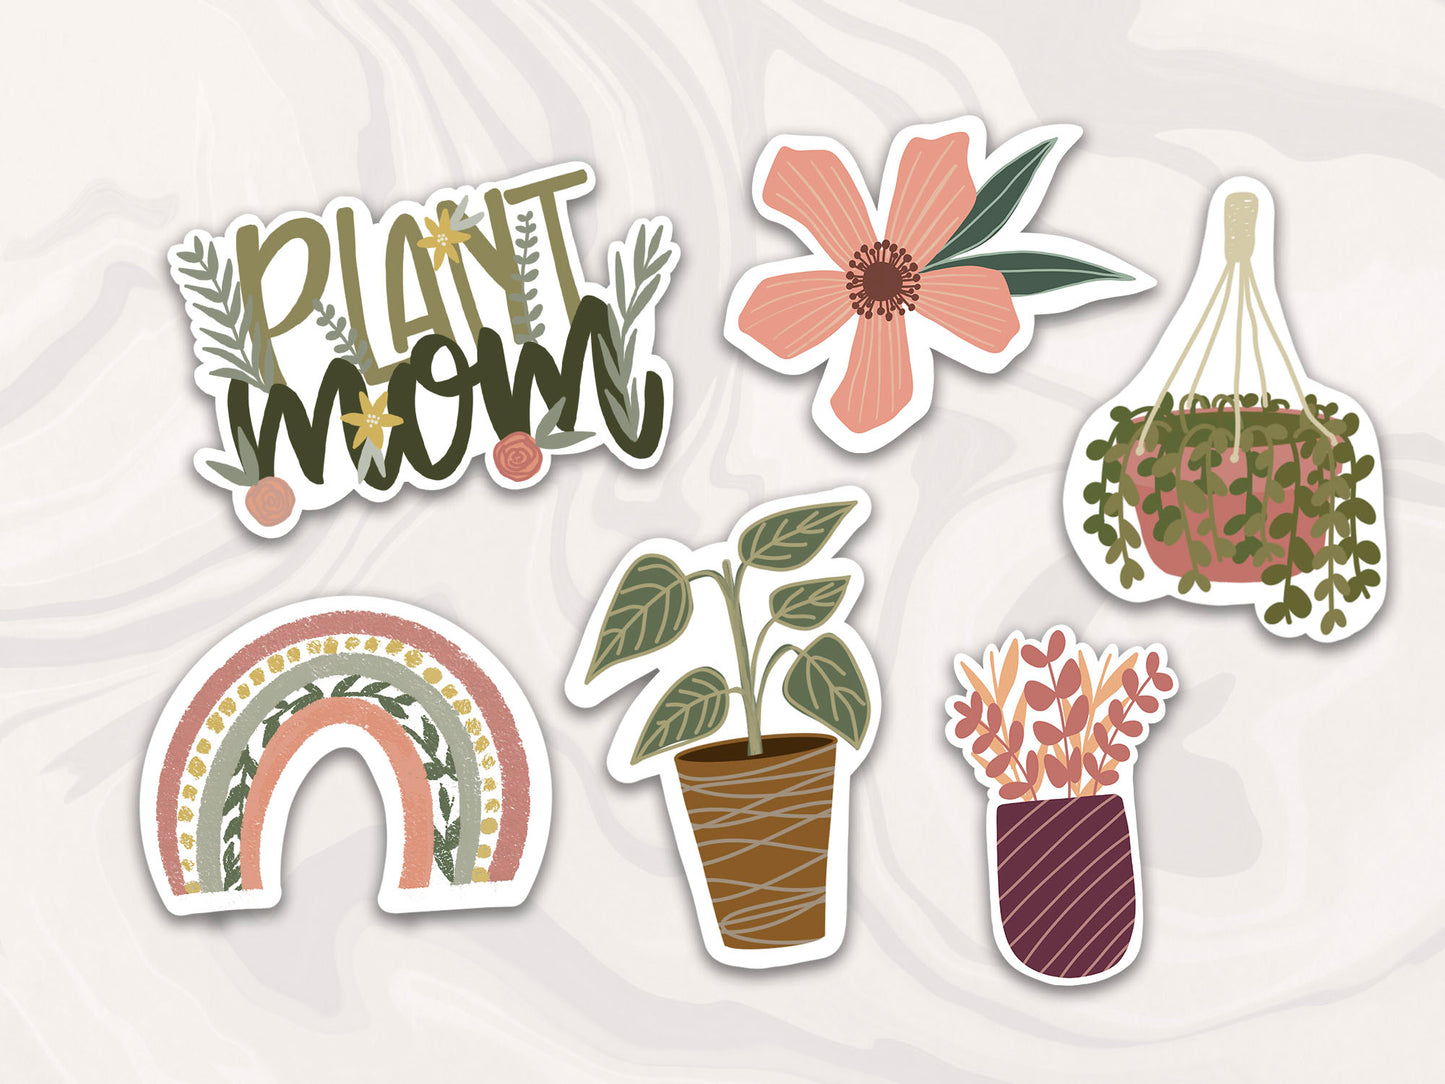 sticker bundle of flower plant themes, waterproof stickers with flowers and house plant motifs